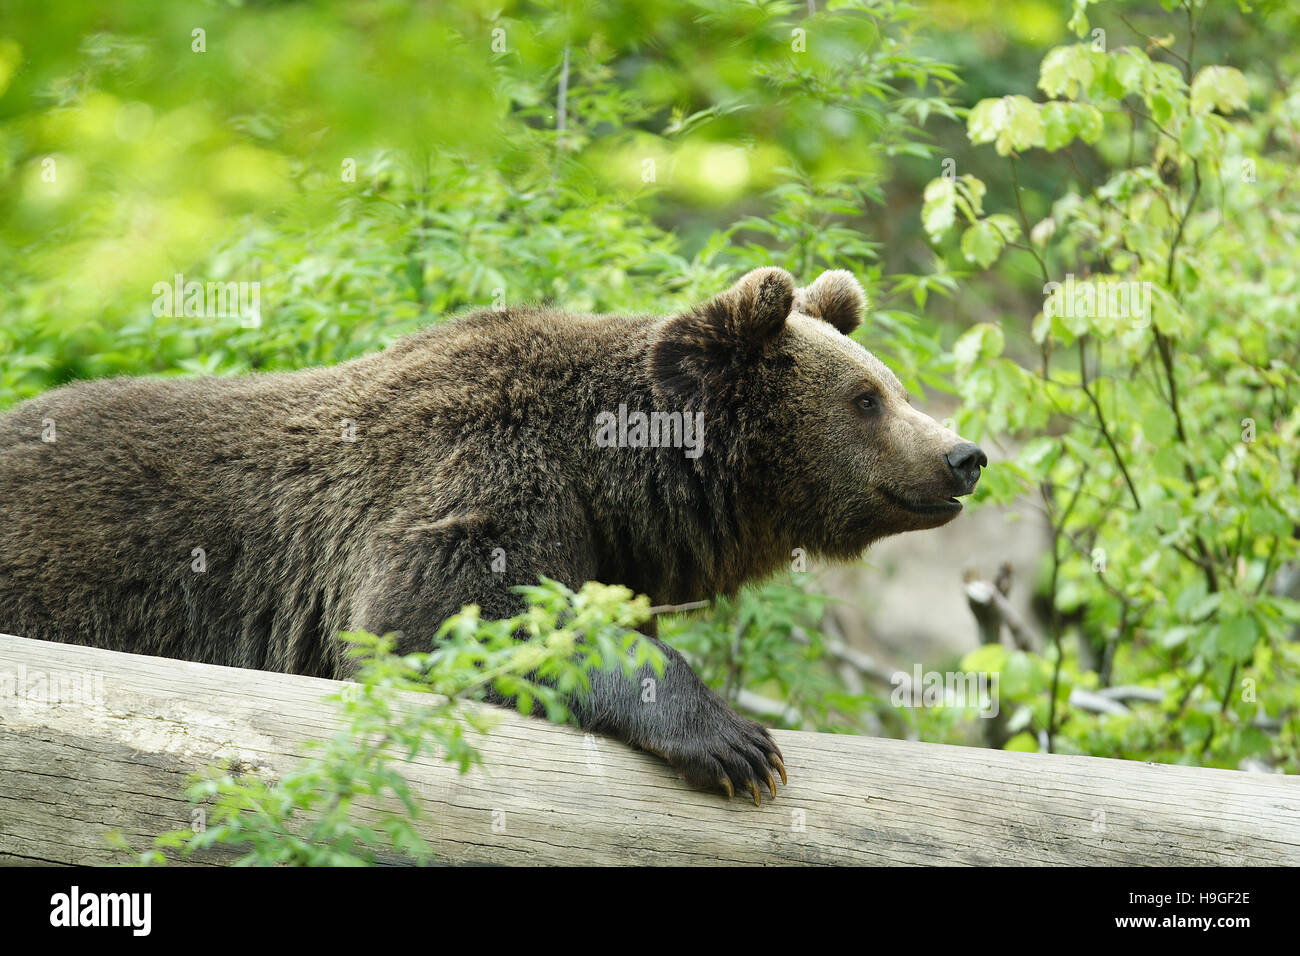 Brown bear in the forest of the Bayerische Wald National Park In Germany Stock Photo